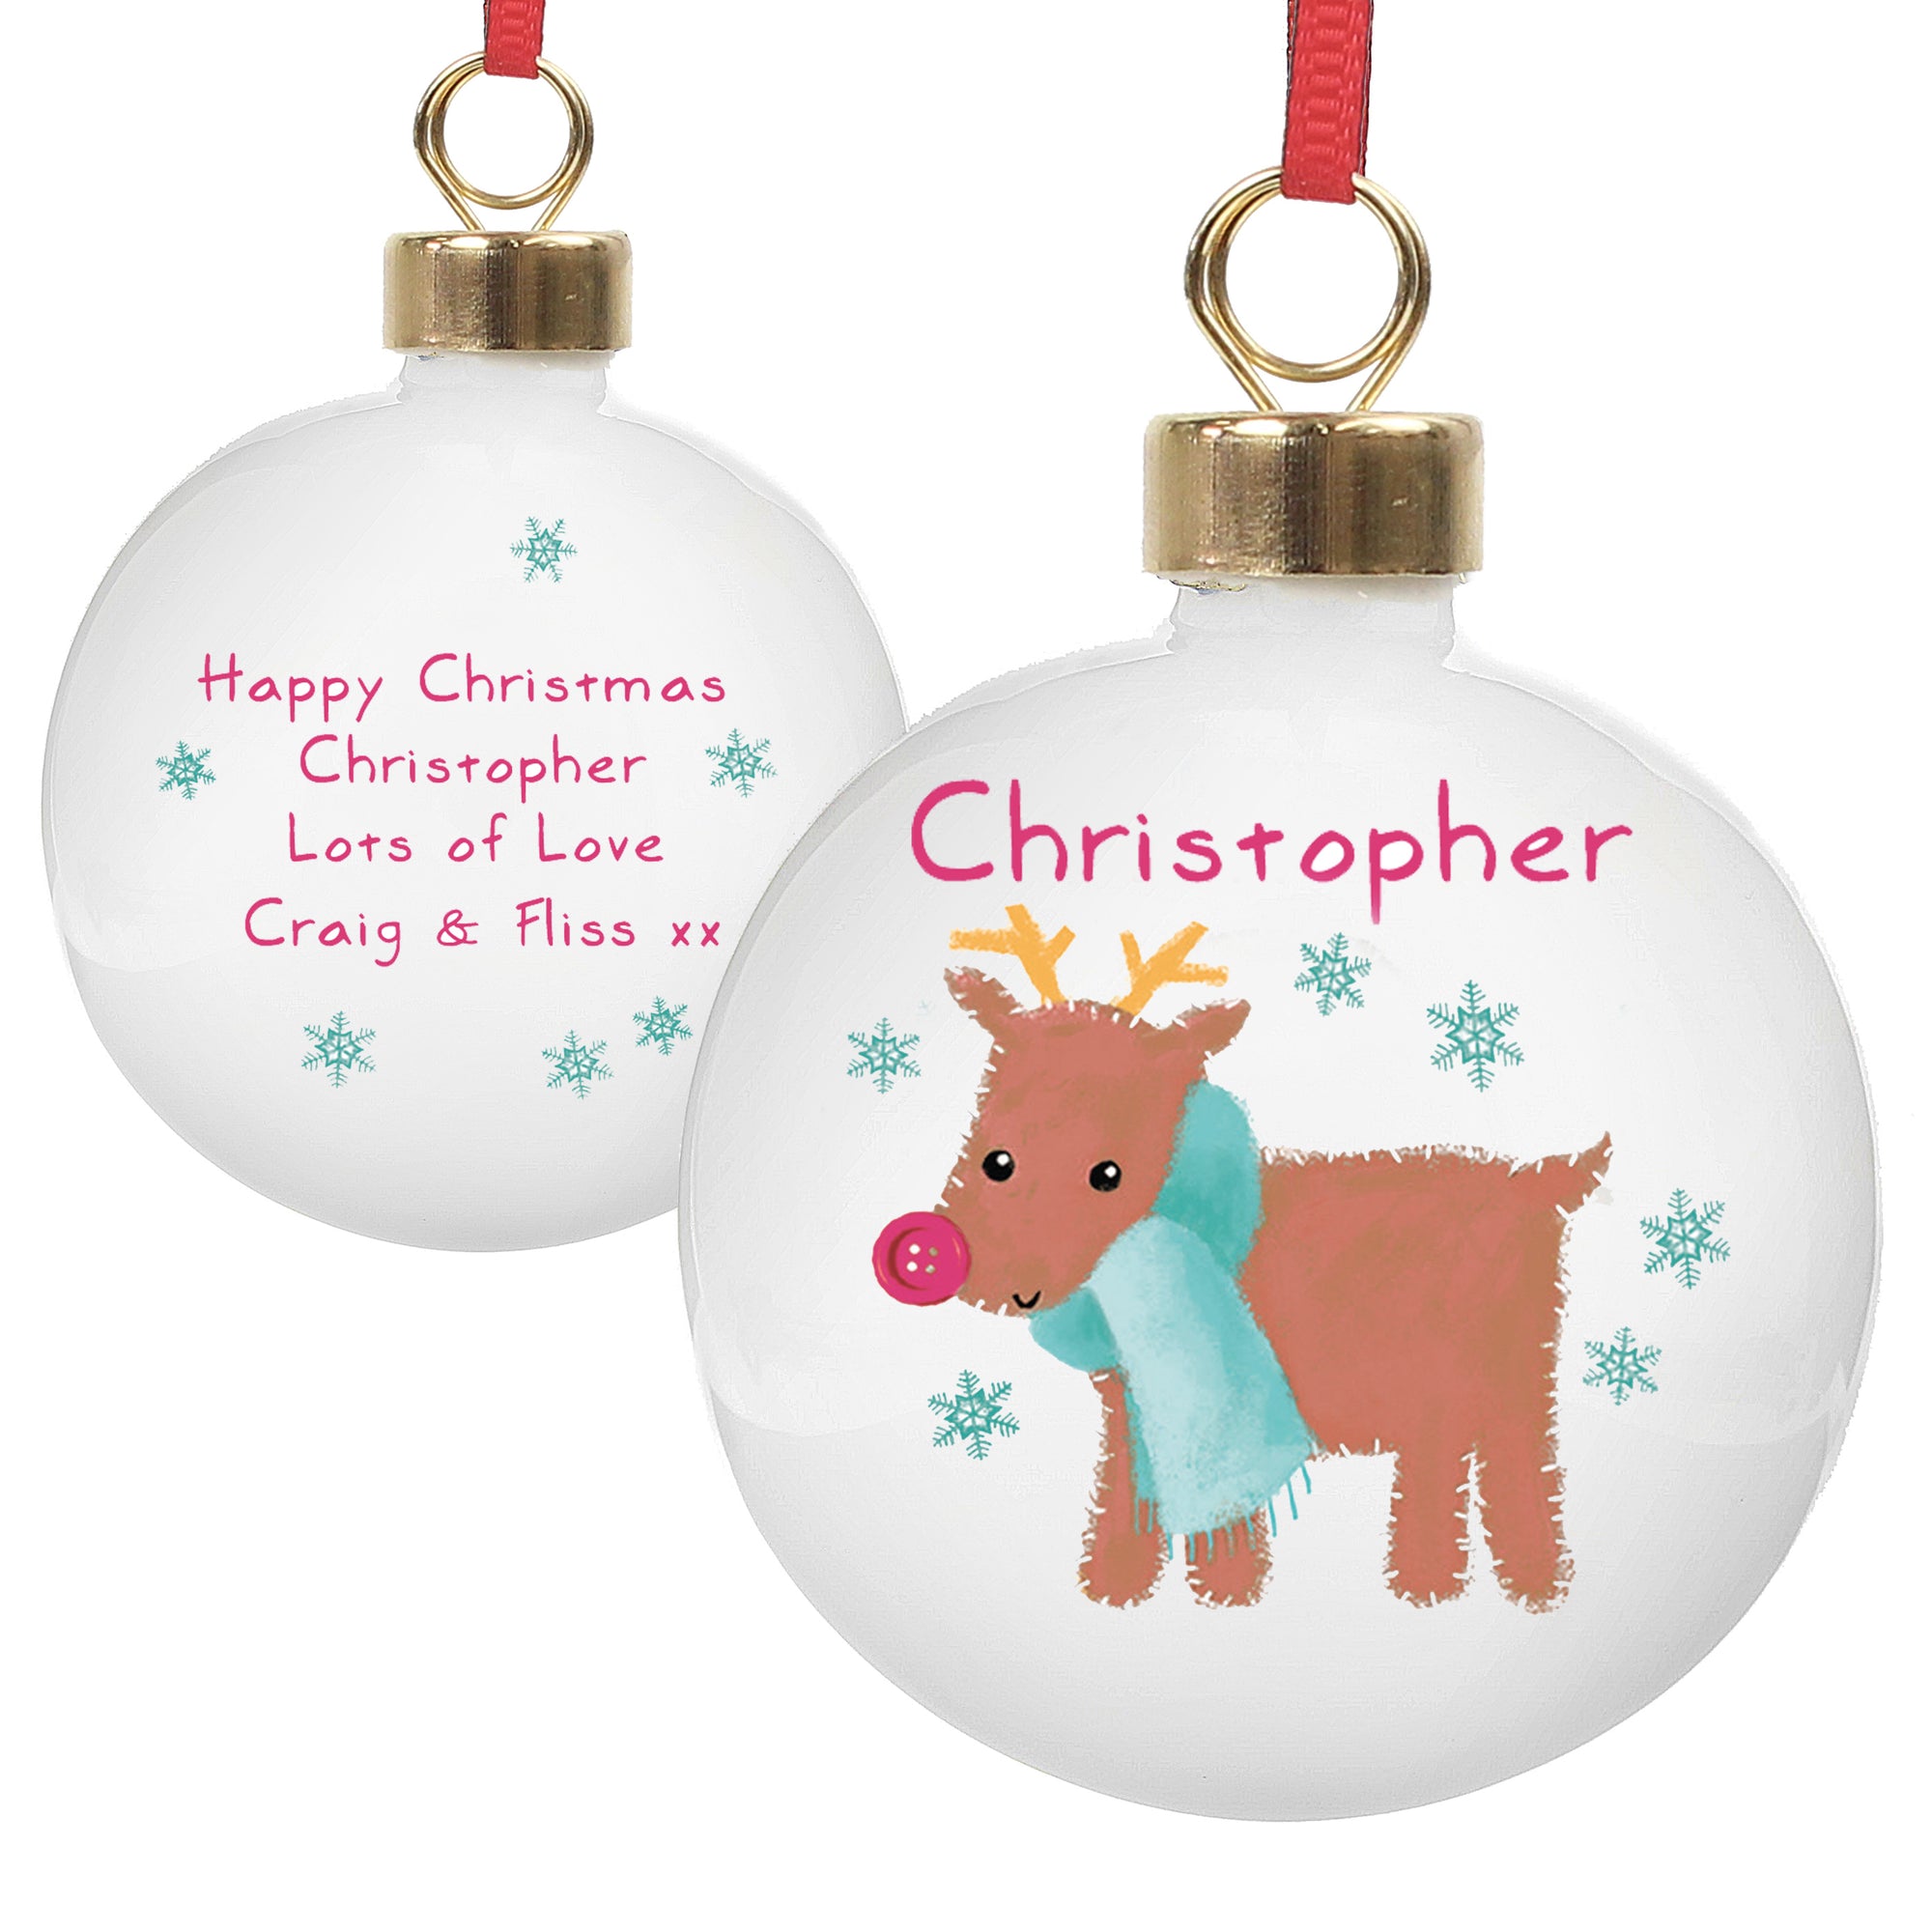 personalised white ceramic round Christmas bauble featuring an image of a hand-drawn reindeer wearing a scarf. The front of the bauble can be personalised with a name of your choice which will feature above the reindeer and on the back, you can put your own special message over 4 lines.